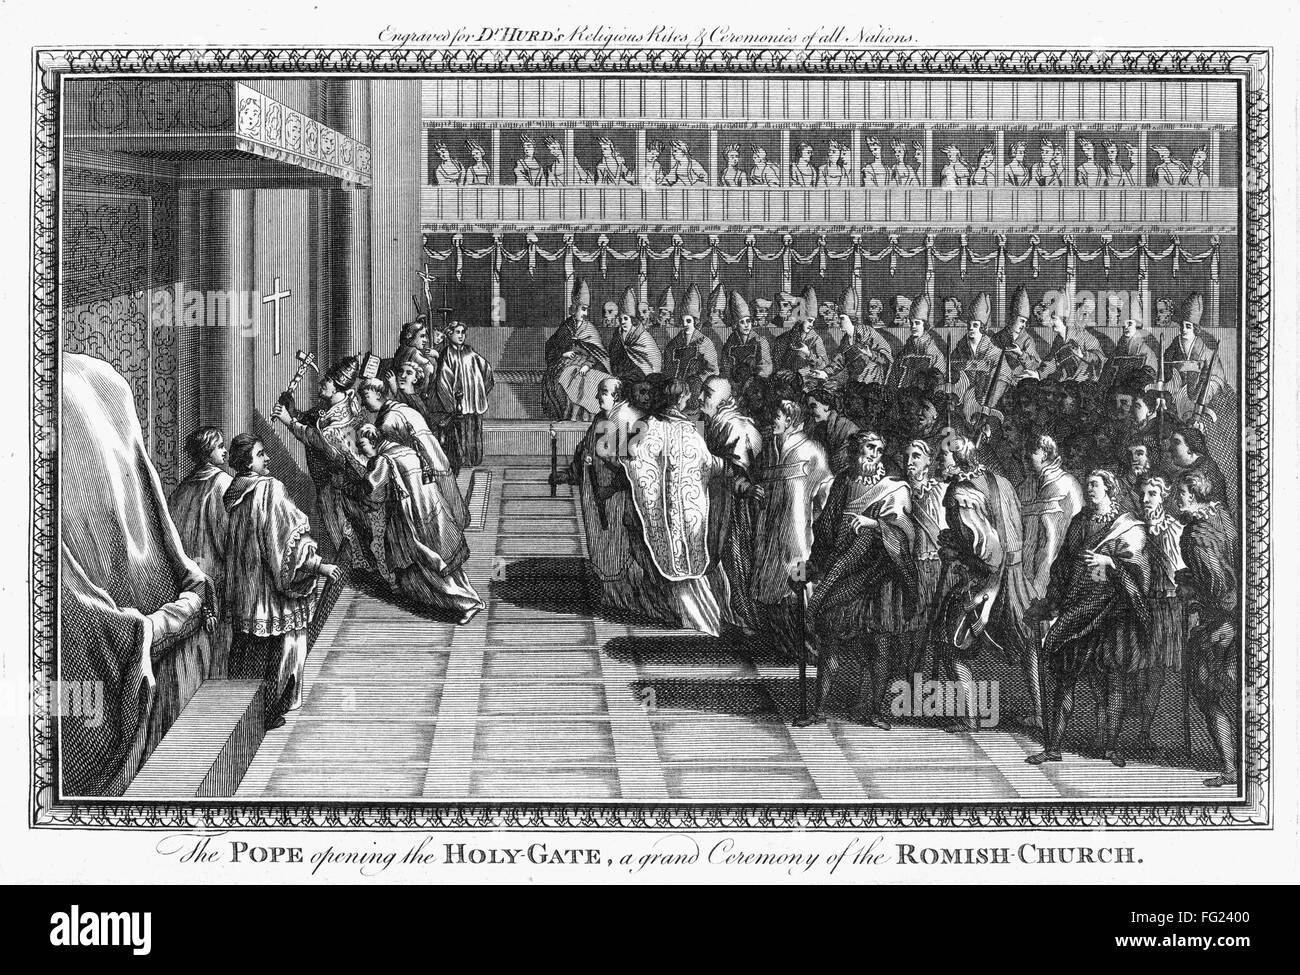 RELIGION: JUBILEE. /n'The Pope opening the Holy Gate, a grand Ceremony of the Romish-Church.' The Pope opening a Holy door at a papal basilica in Rome, at the opening of a Jubilee year. Copper engraving, from Dr. Richard Hurd's 'Religious Rites and Ceremo Stock Photo